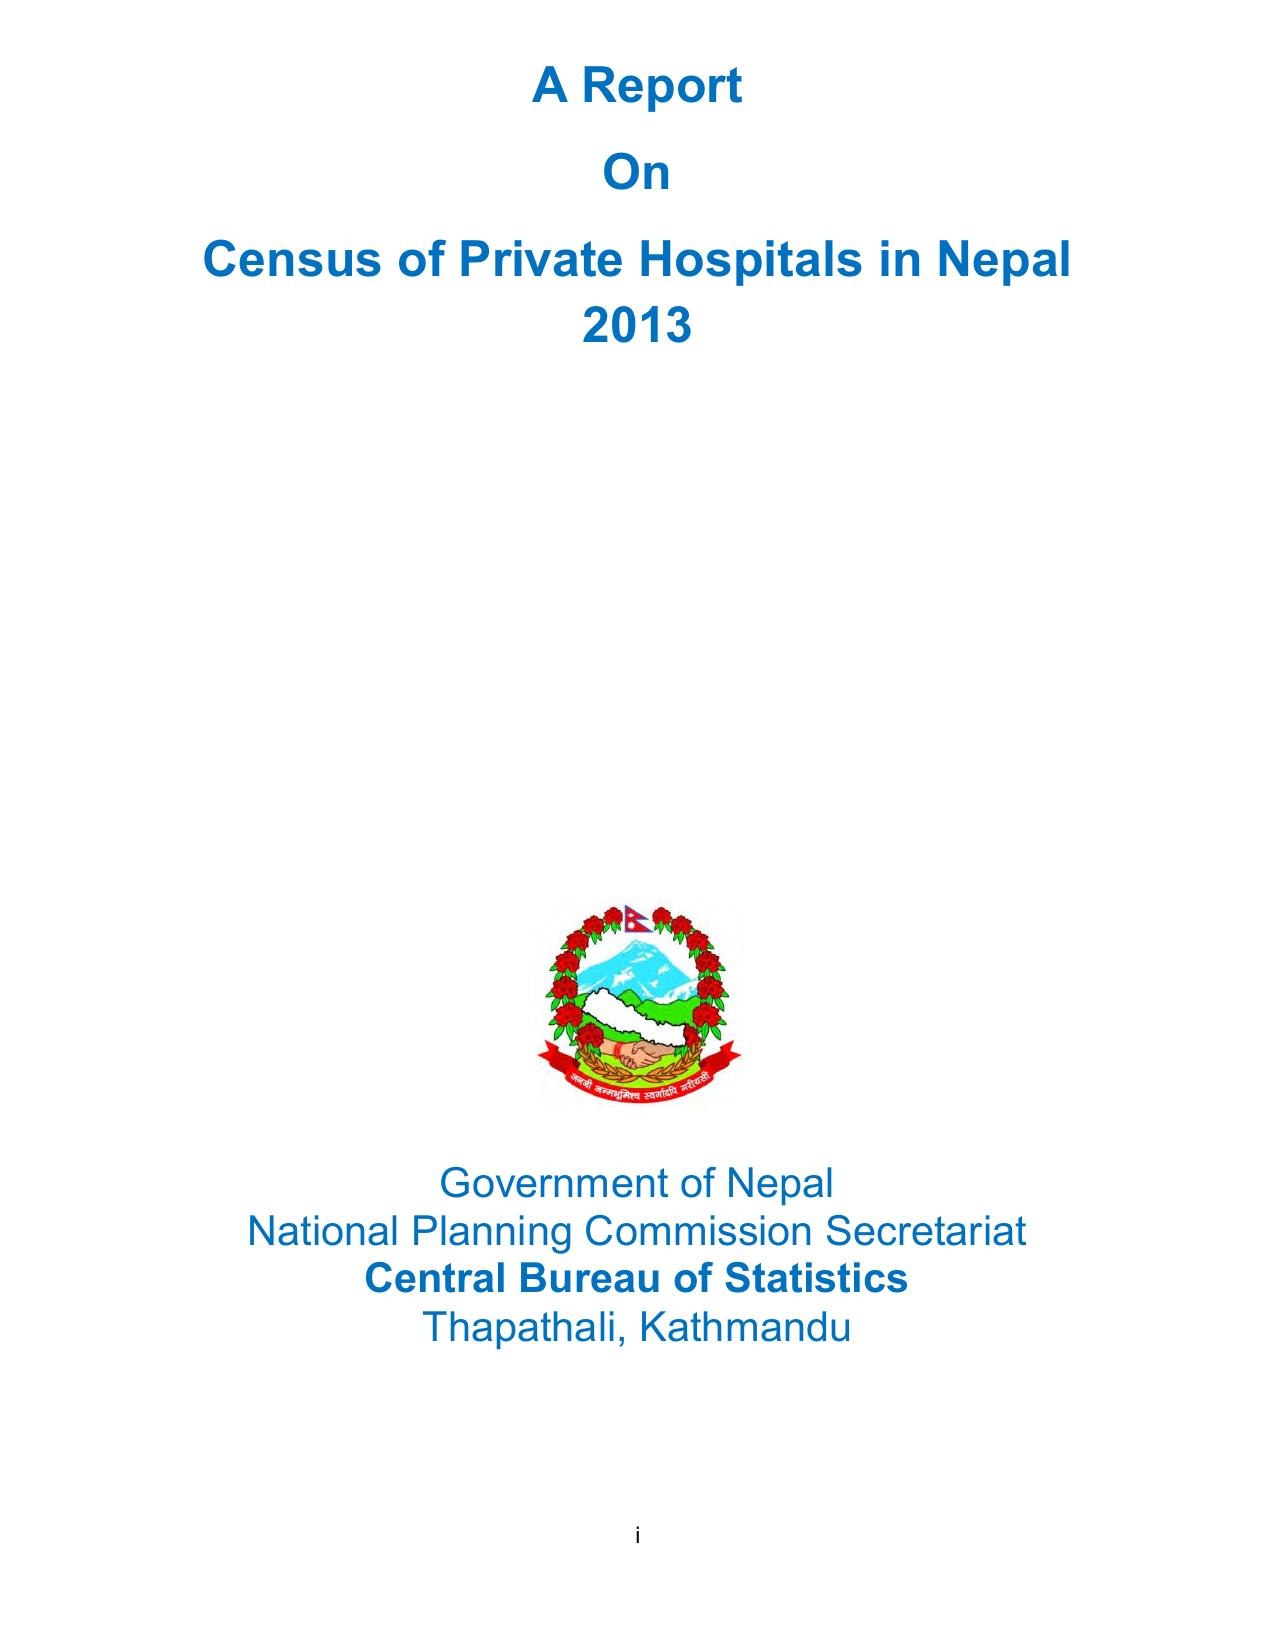 A Report On Census Of Private Hospitals In Nepal2013